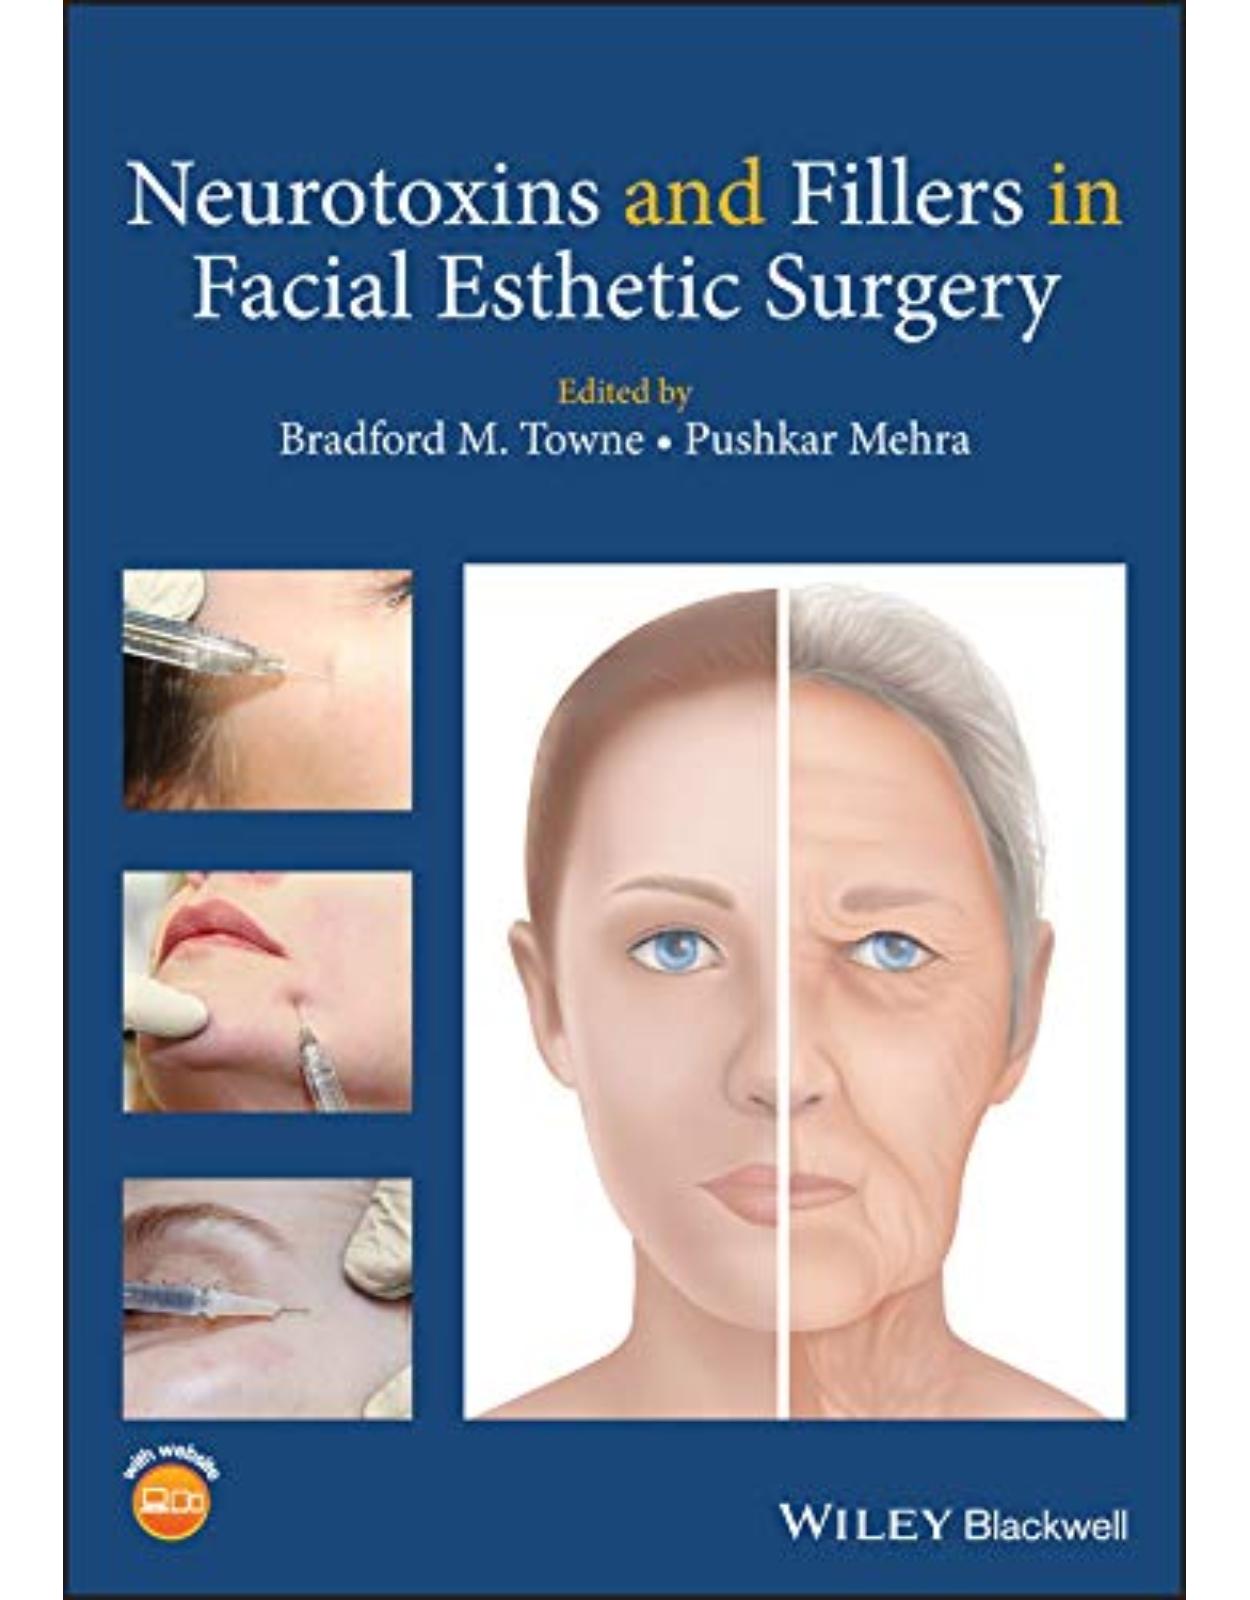 Neurotoxins and Fillers in Facial Esthetic Surgery